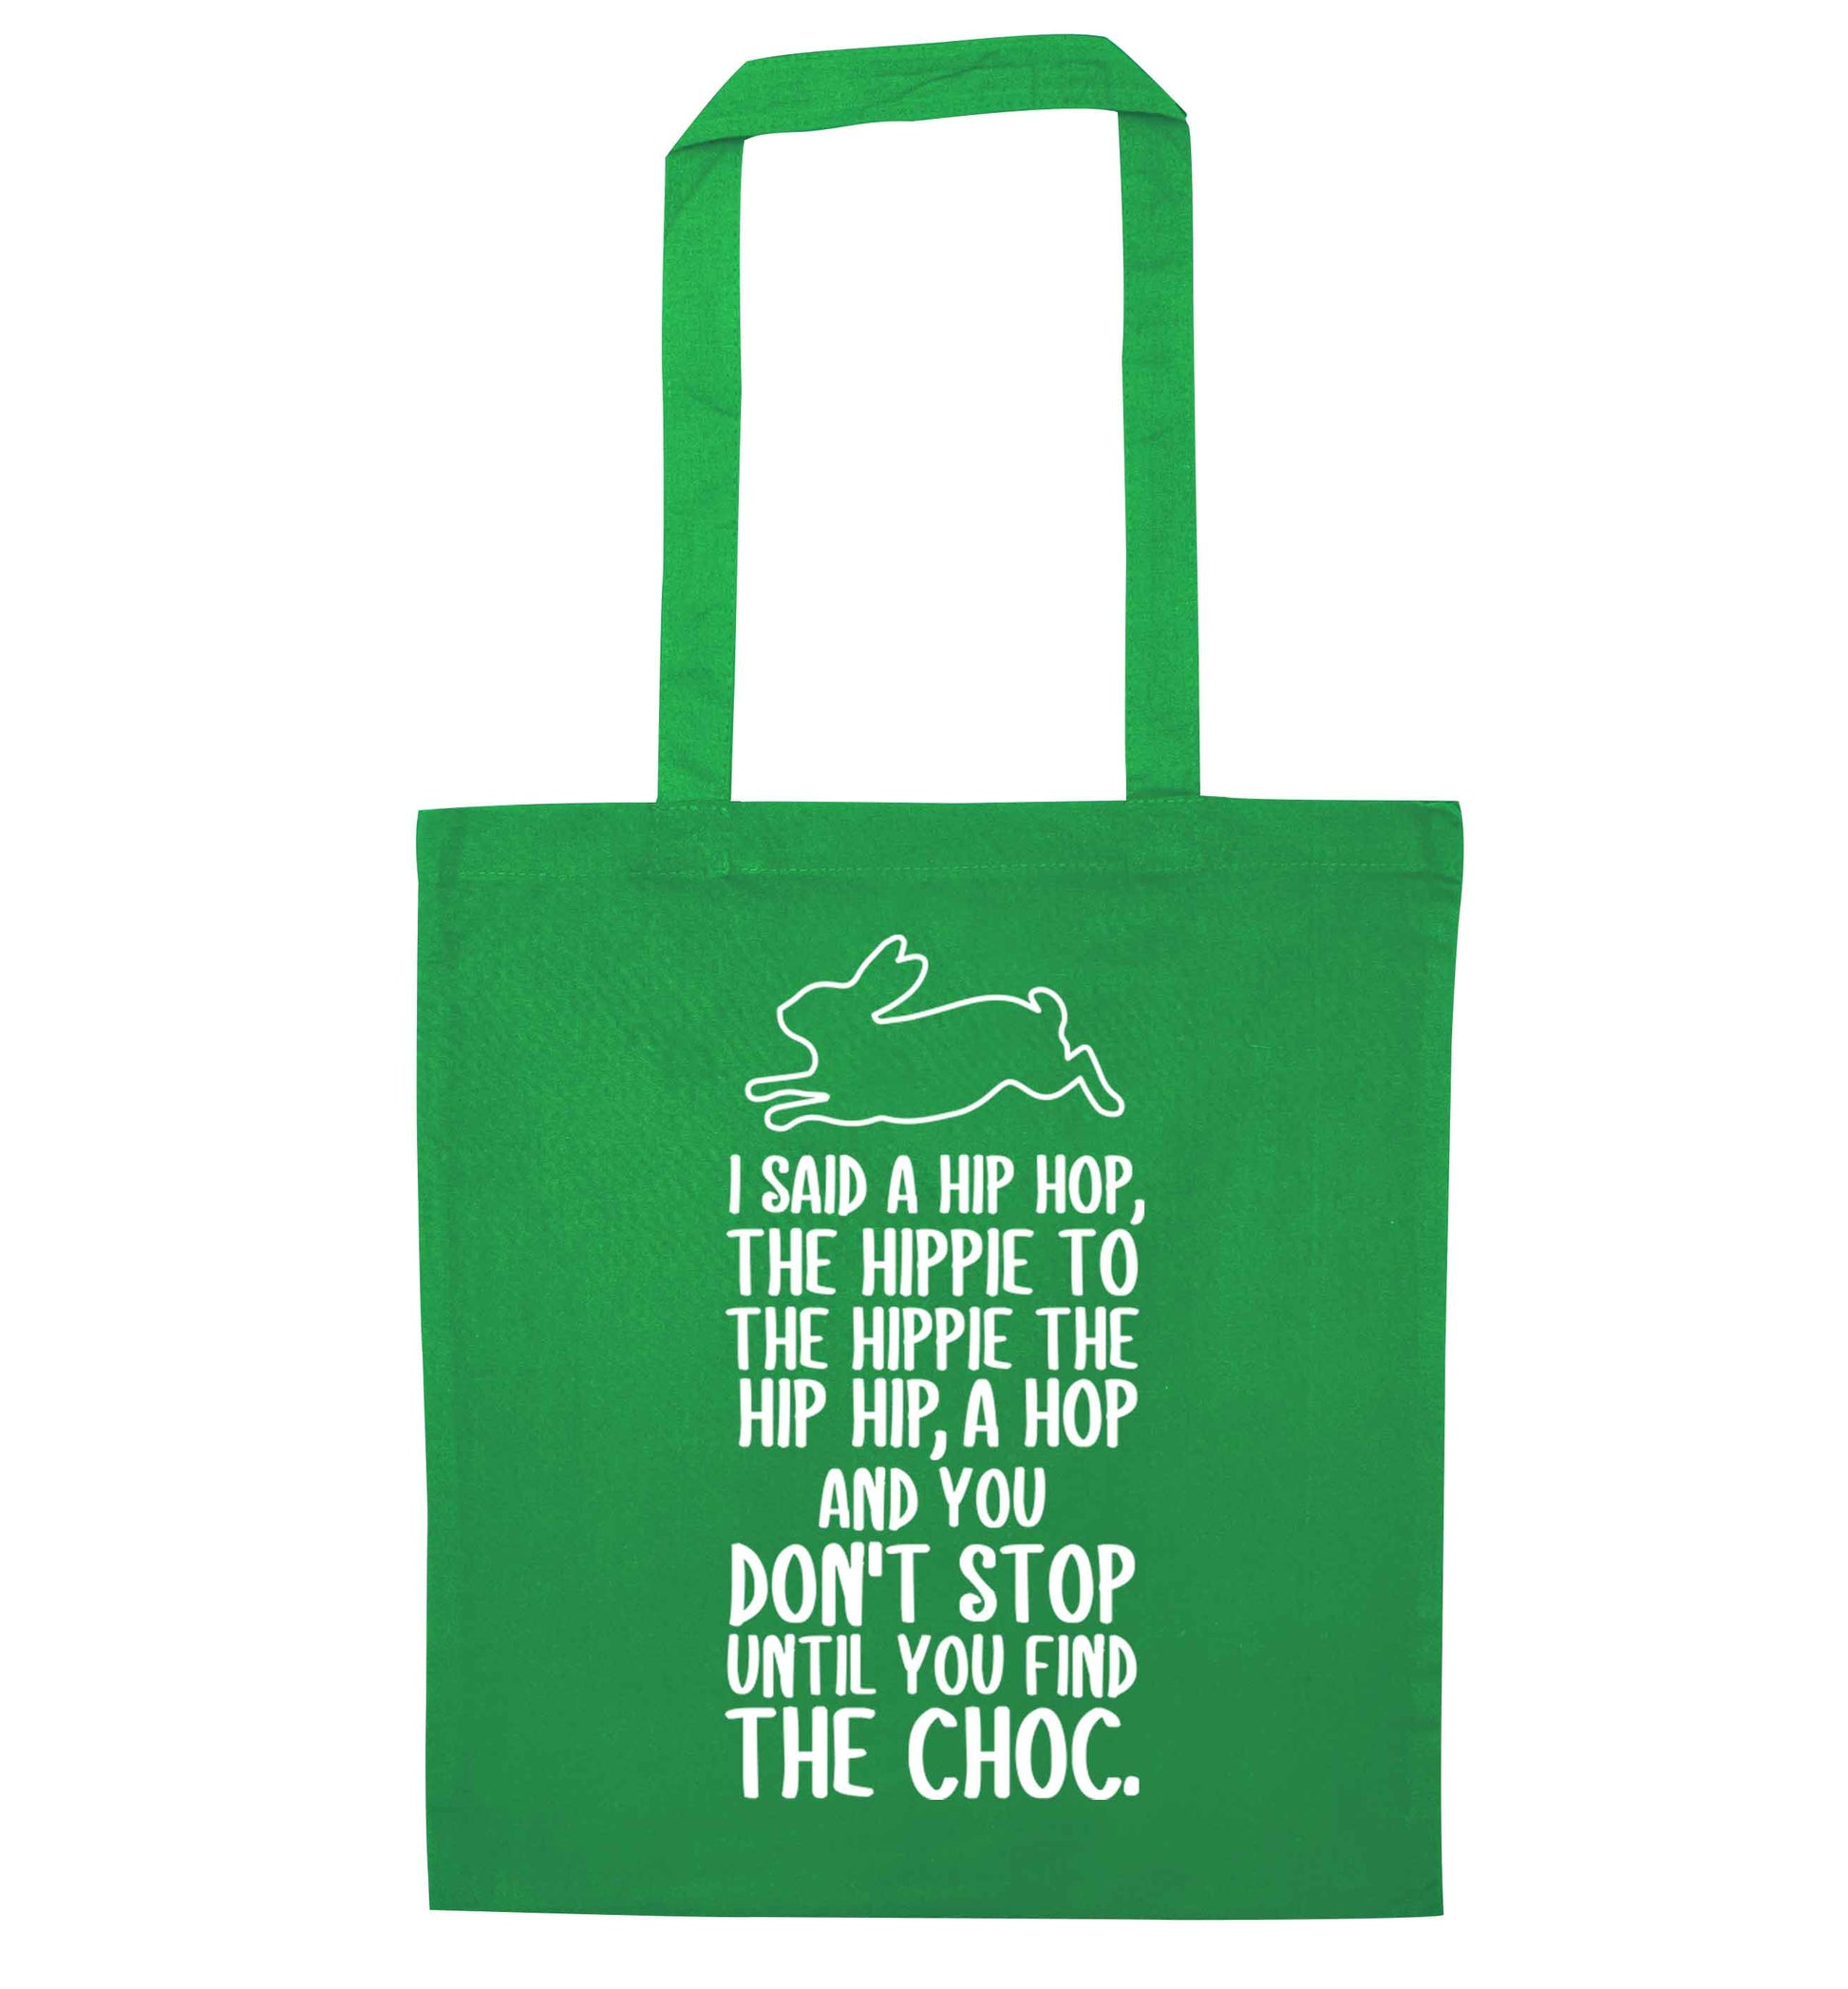 Don't stop until you find the choc green tote bag